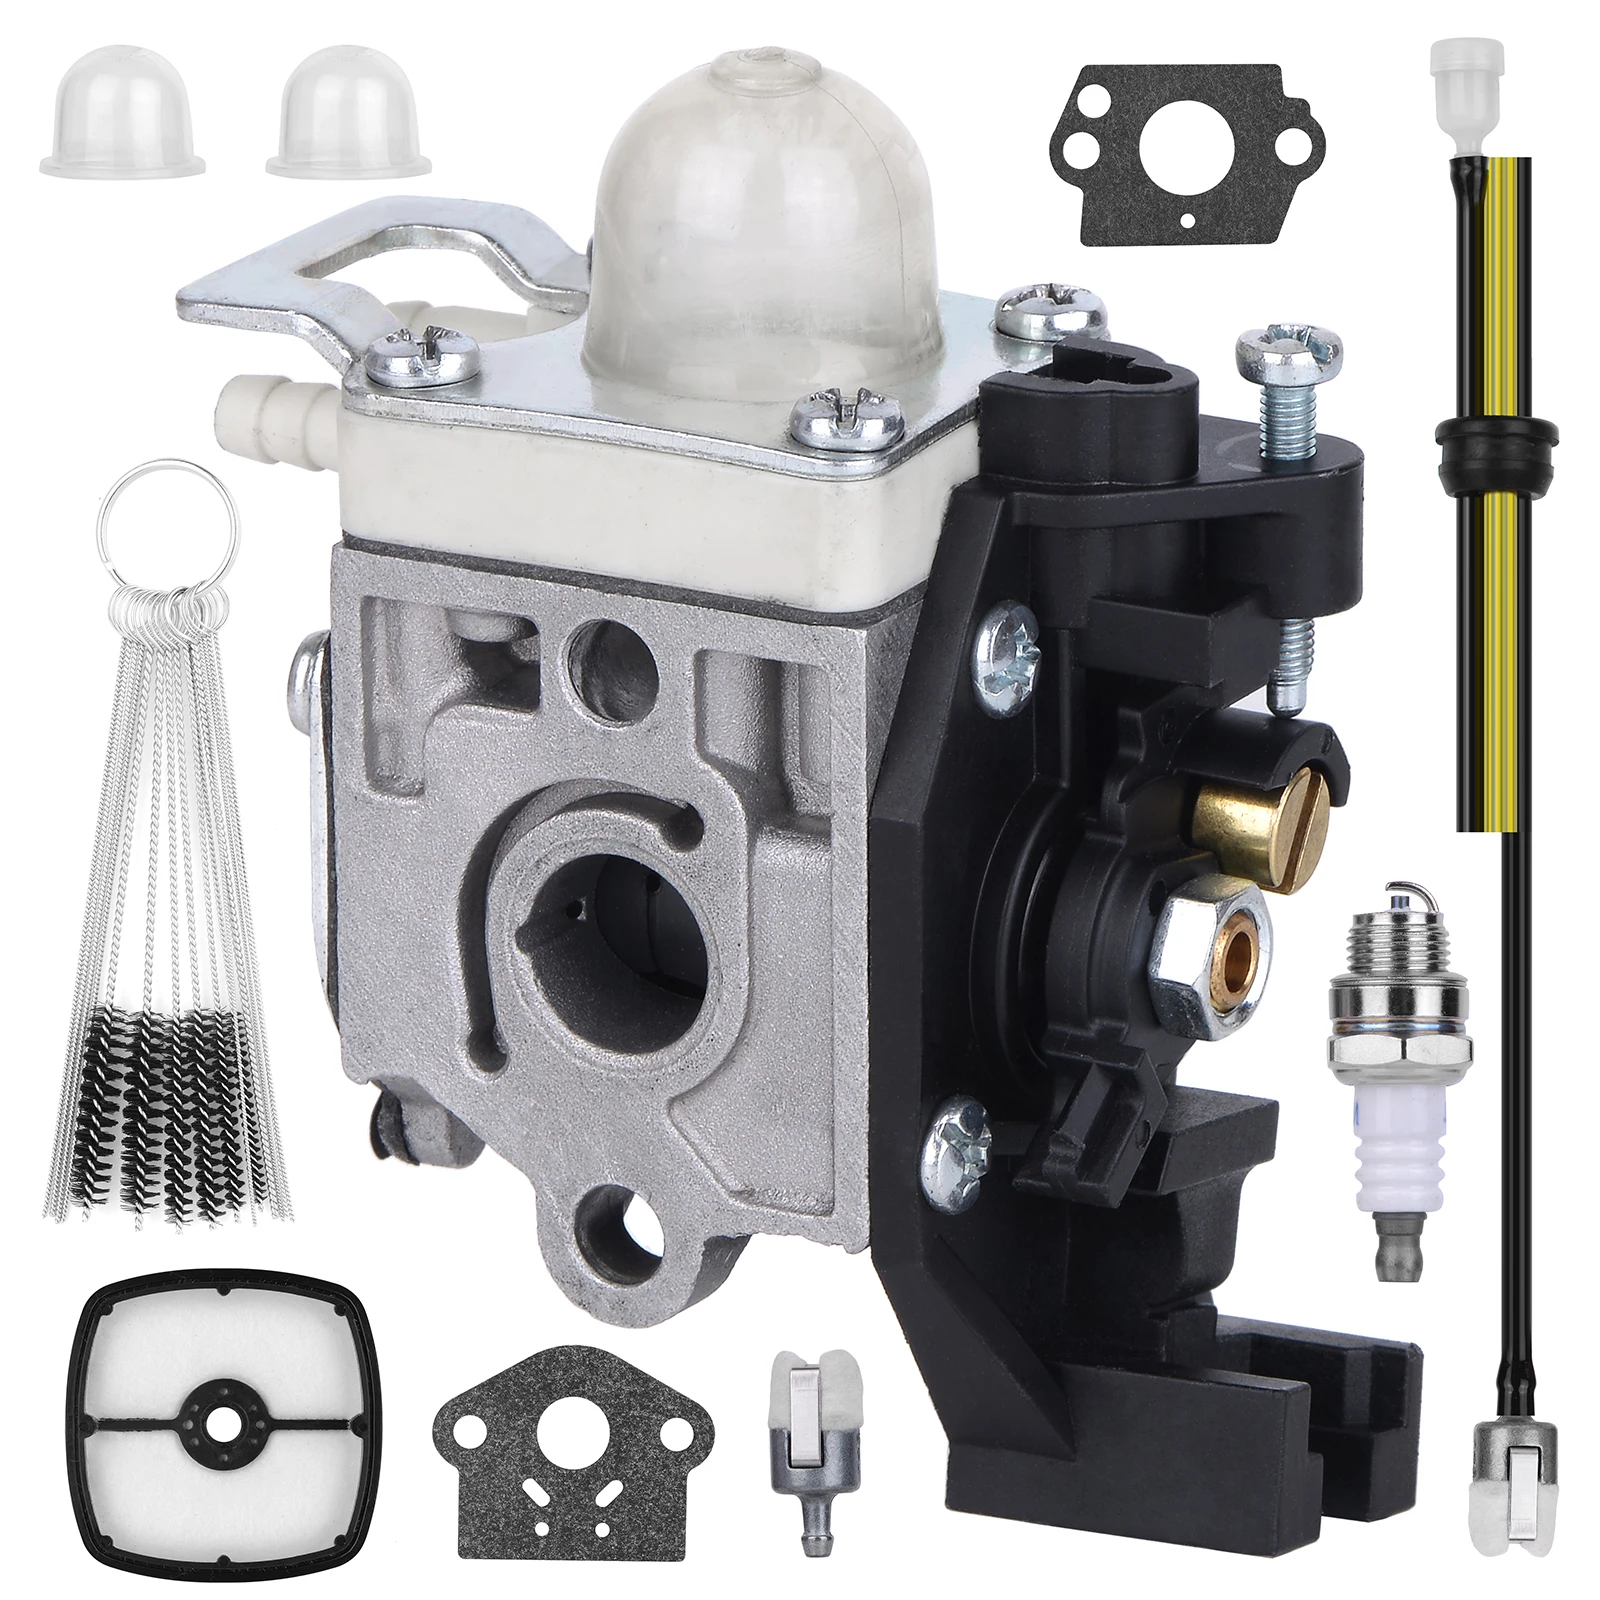 

Jtron Carburetor Kit Compatible for Zama RB-K94 Echo SRM-265 Trimmer Brush Cutter SRM225 Brushcutter Lawnmower Chainsaw Carb